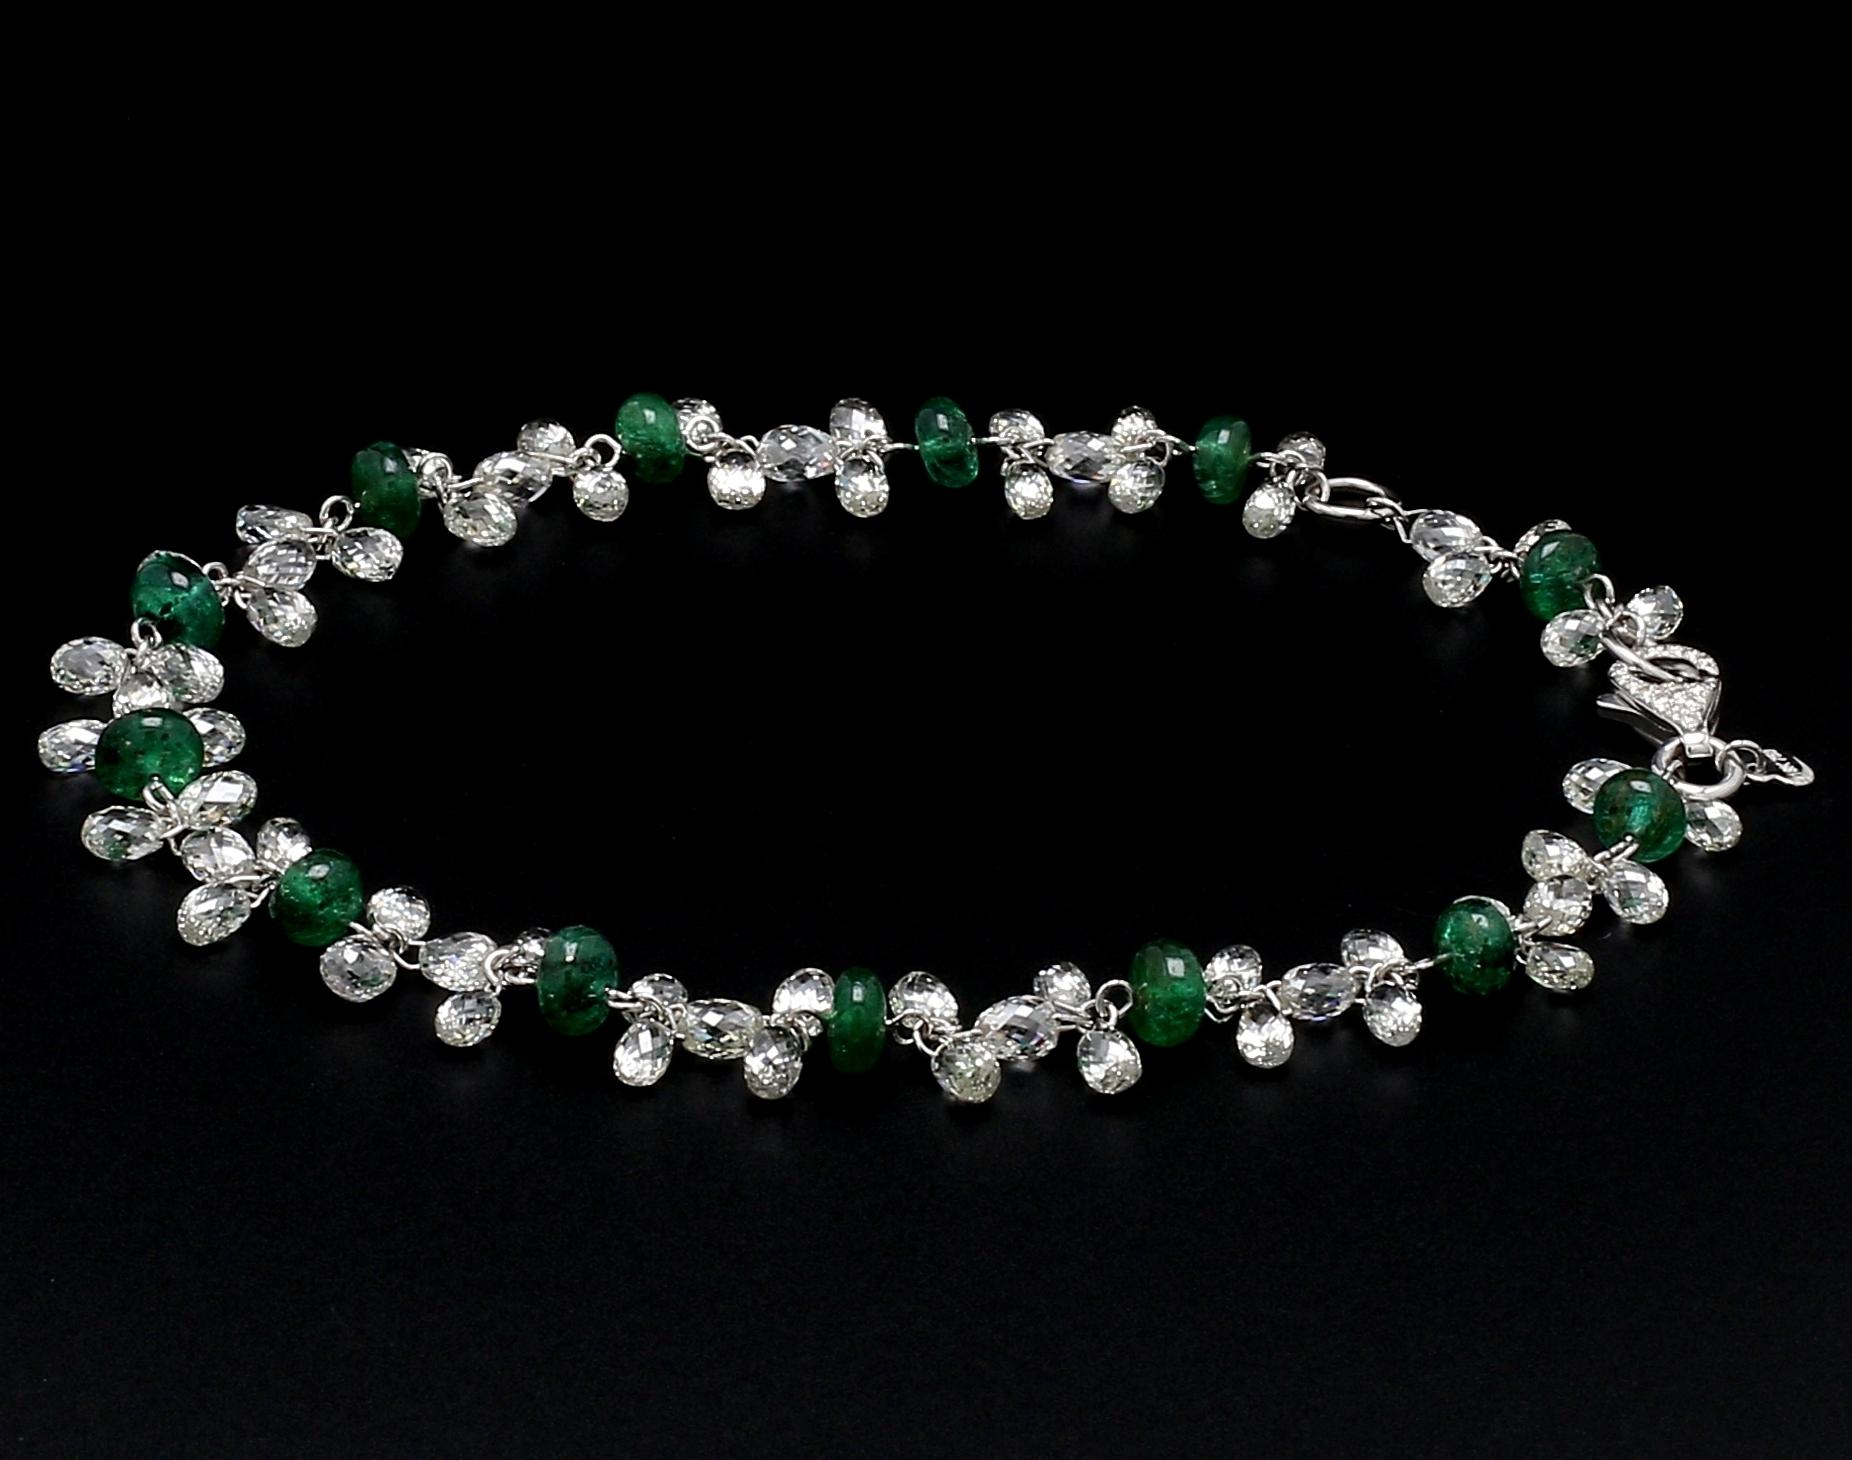 PANIM Diamond Briolette & Emerald 18K White Gold Dangling Bracelet

Bracelets are worn to enhance the look. Women love to look good. Women often wear exquisite gold bracelets on their wrists, and this is quite usual. Every woman should own a diamond